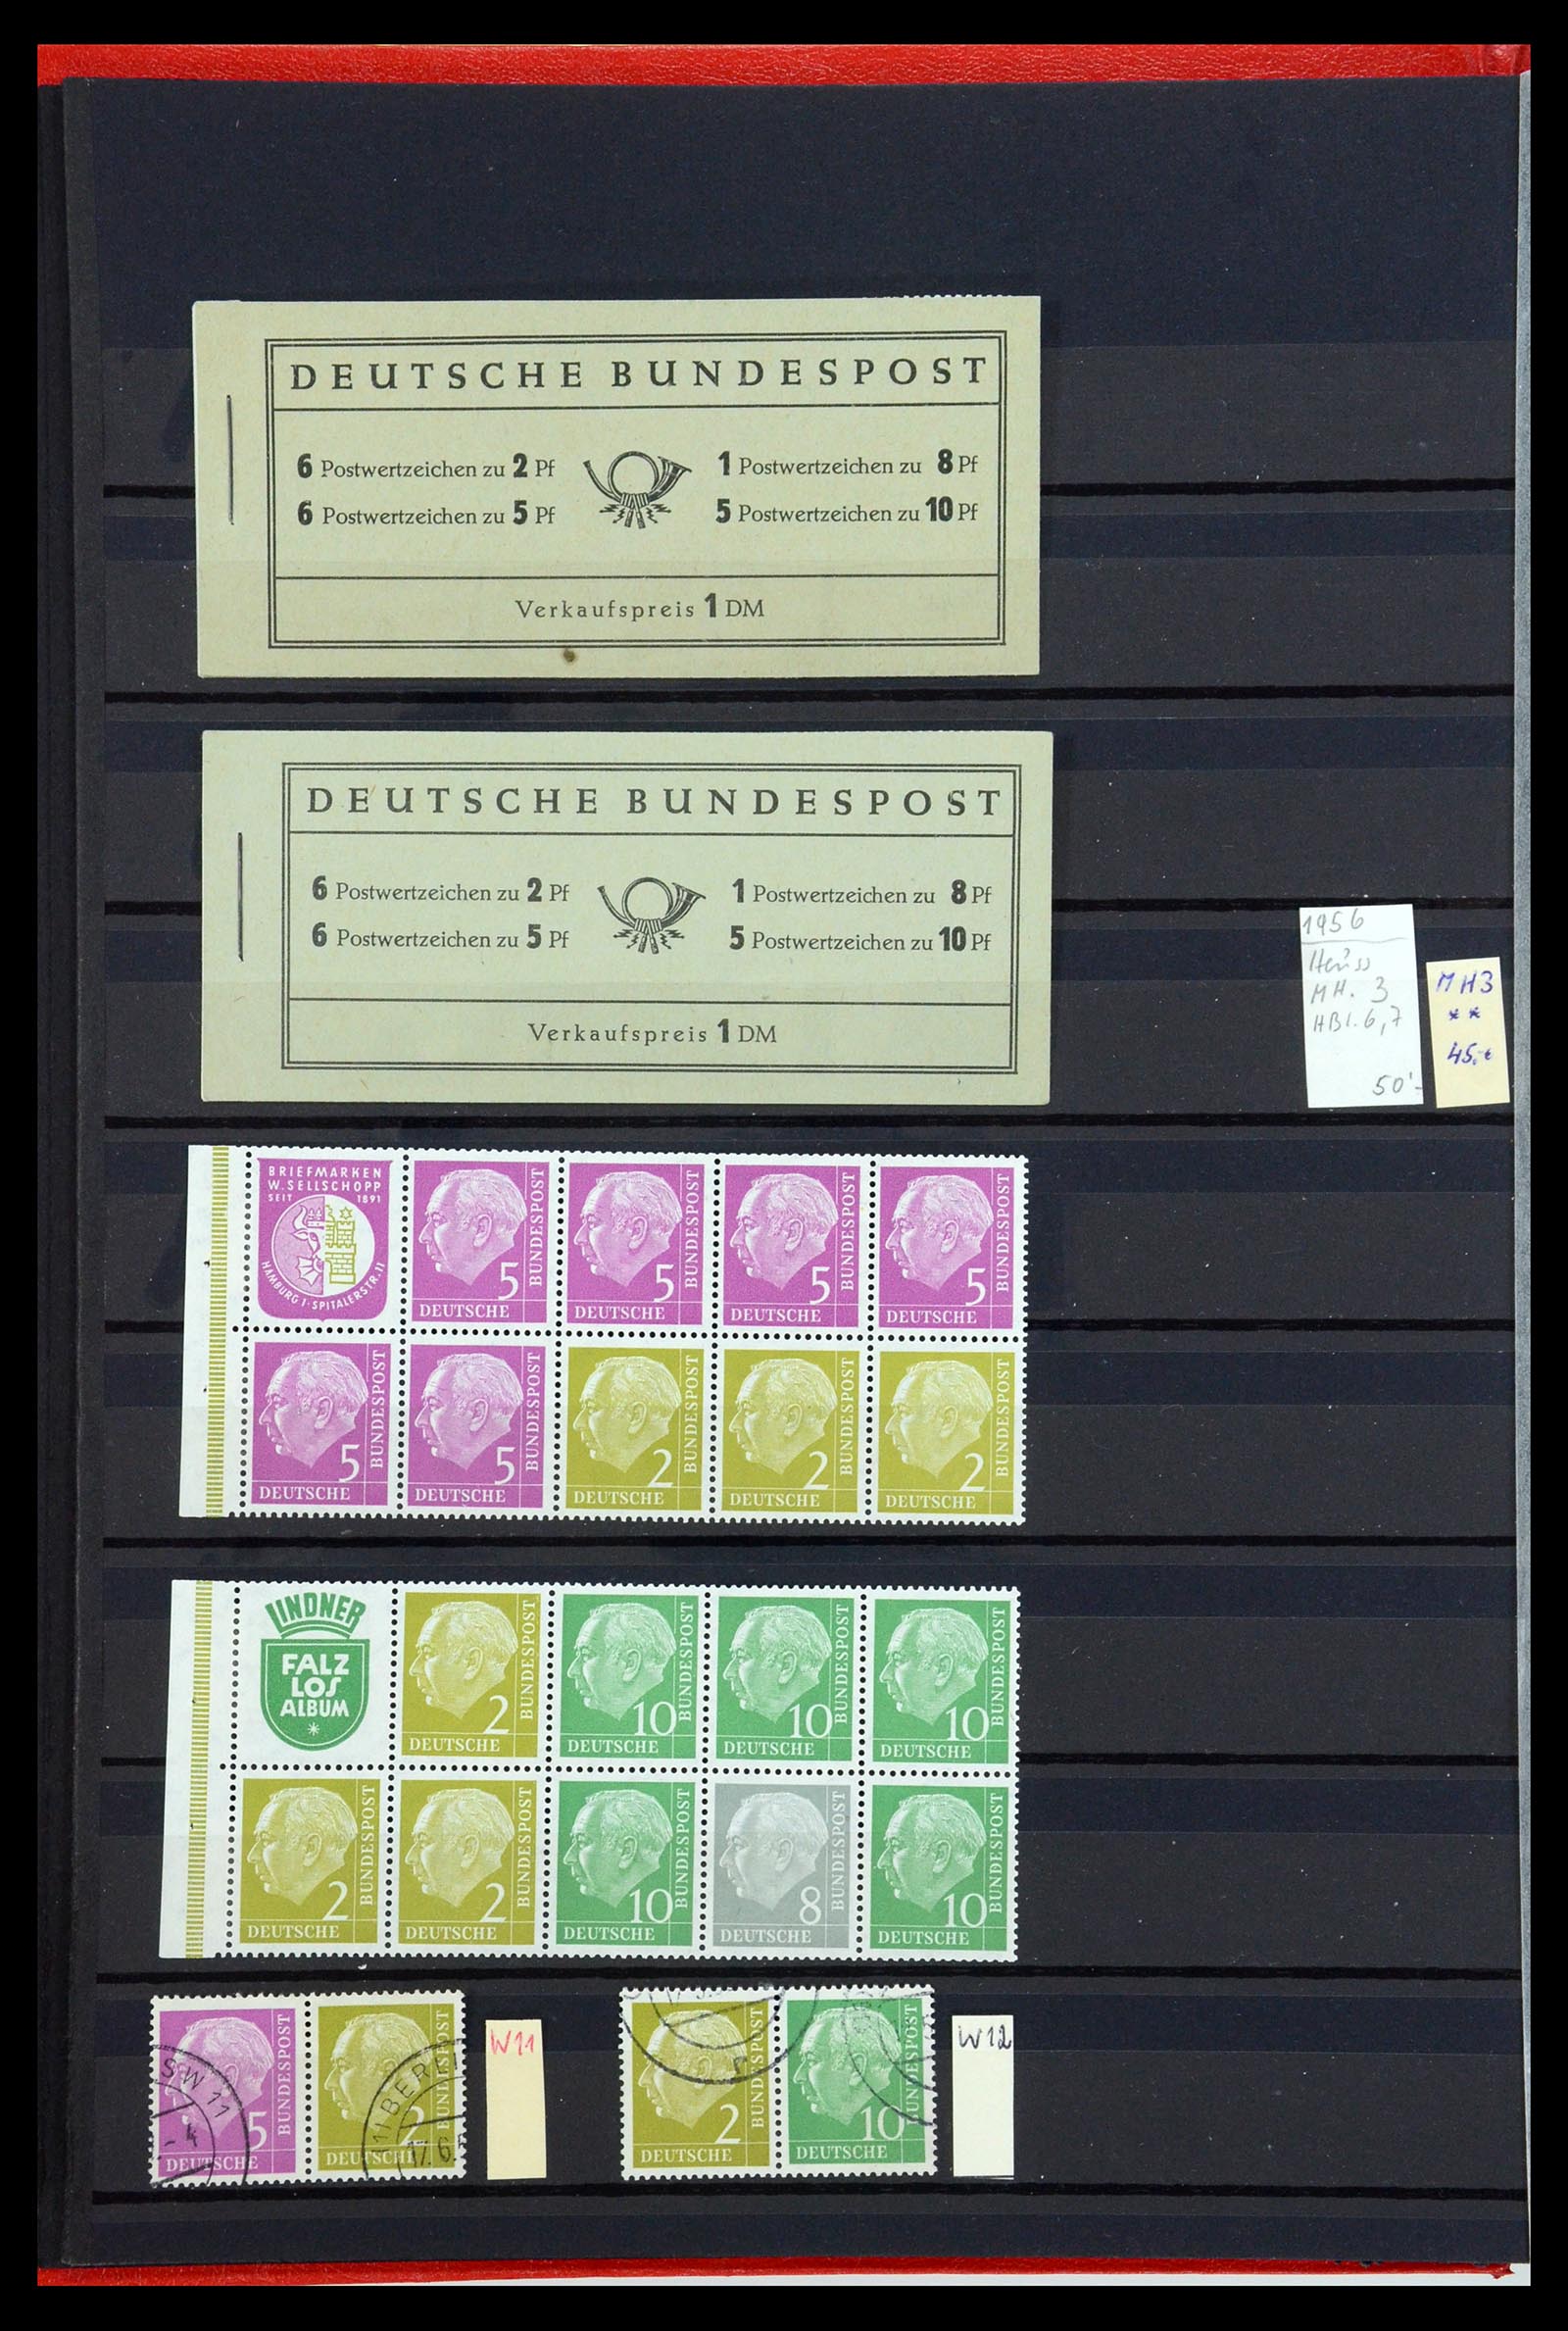 35356 002 - Stamp Collection 35356 Bundespost stamp booklets and combinations 1951-2